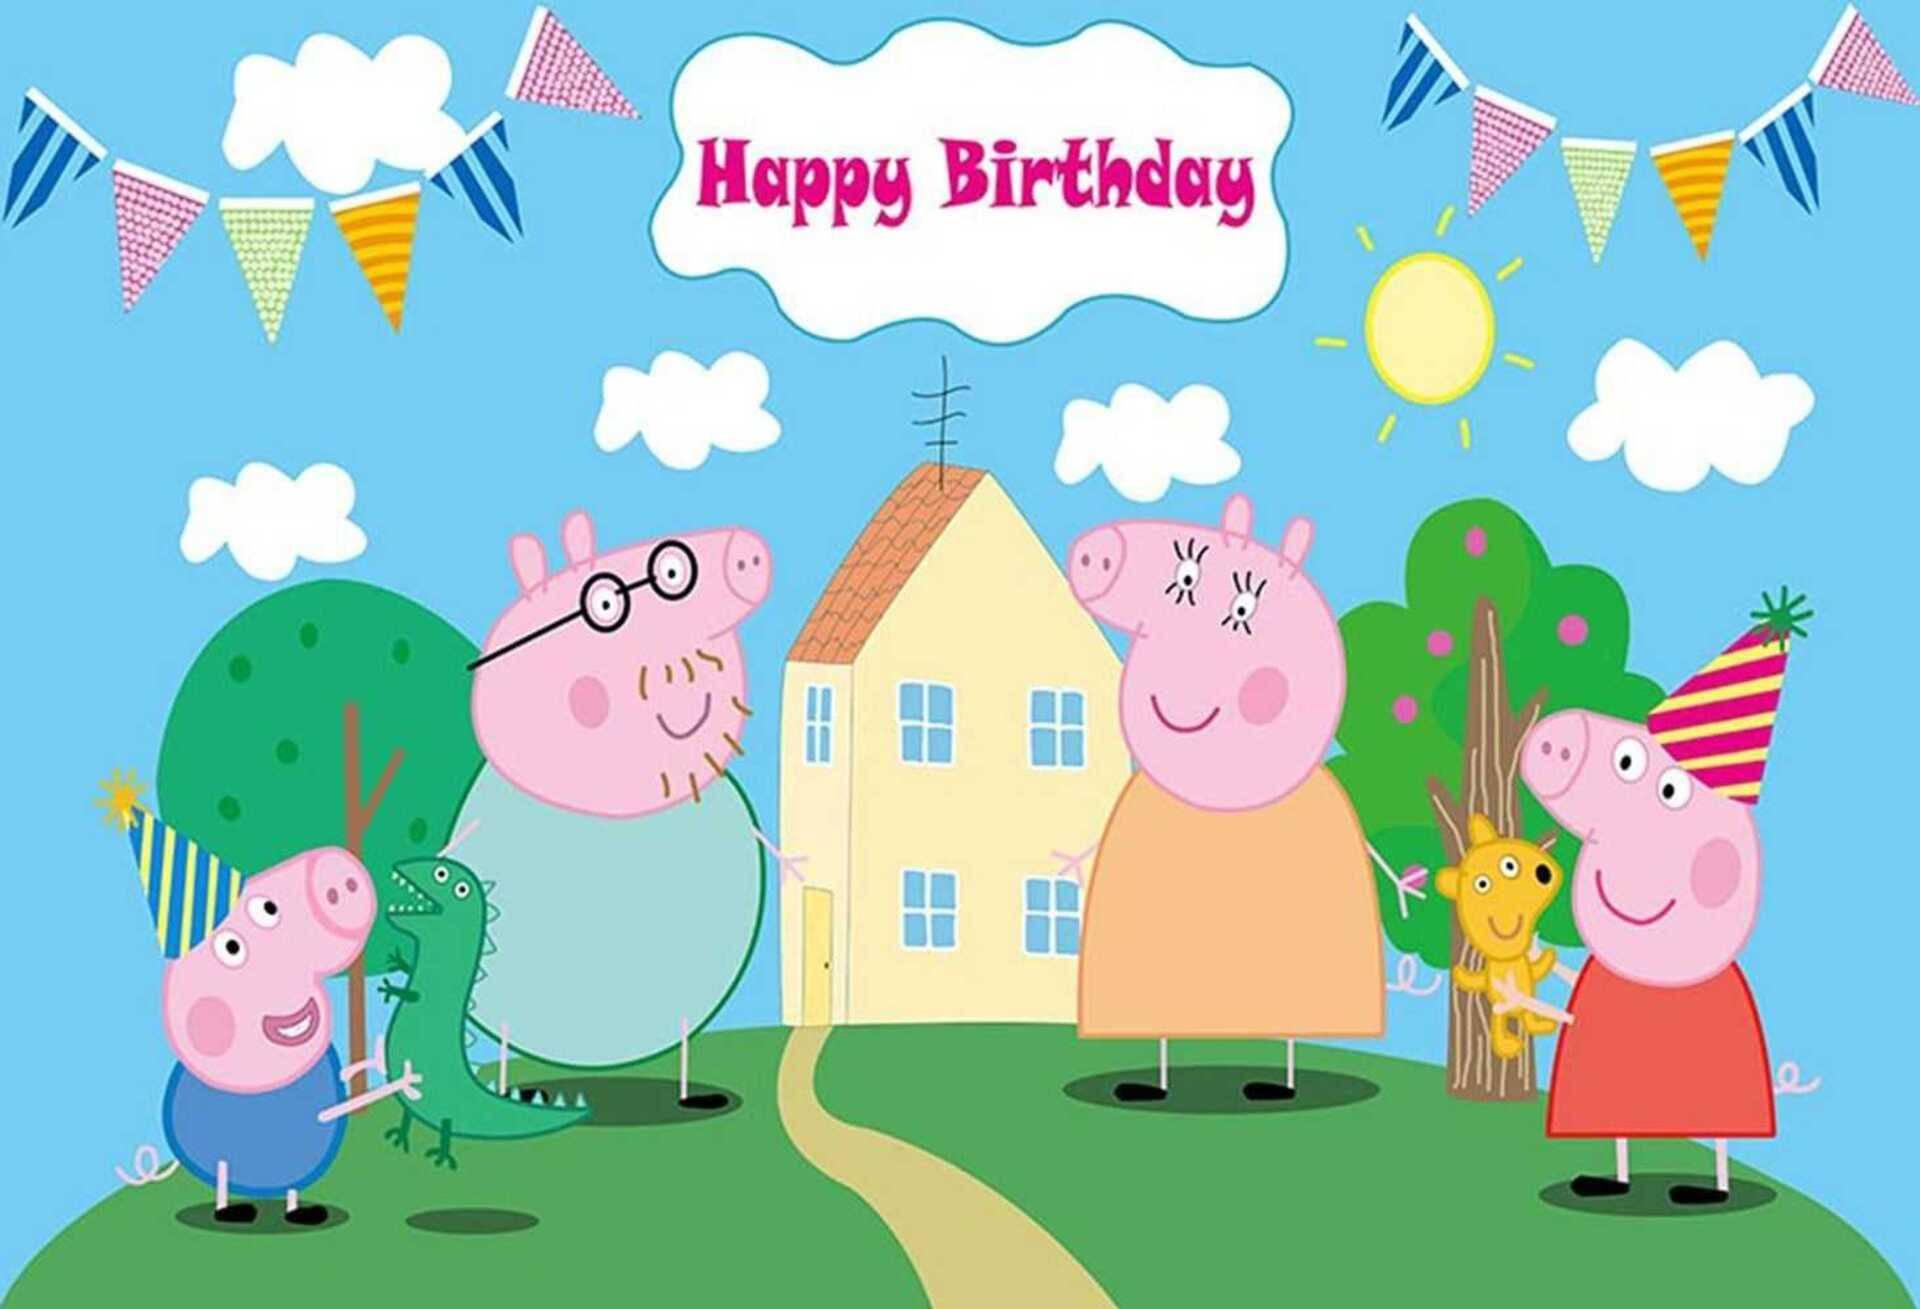 A Happy BirtHDay Greeting From Peppa Pig S House